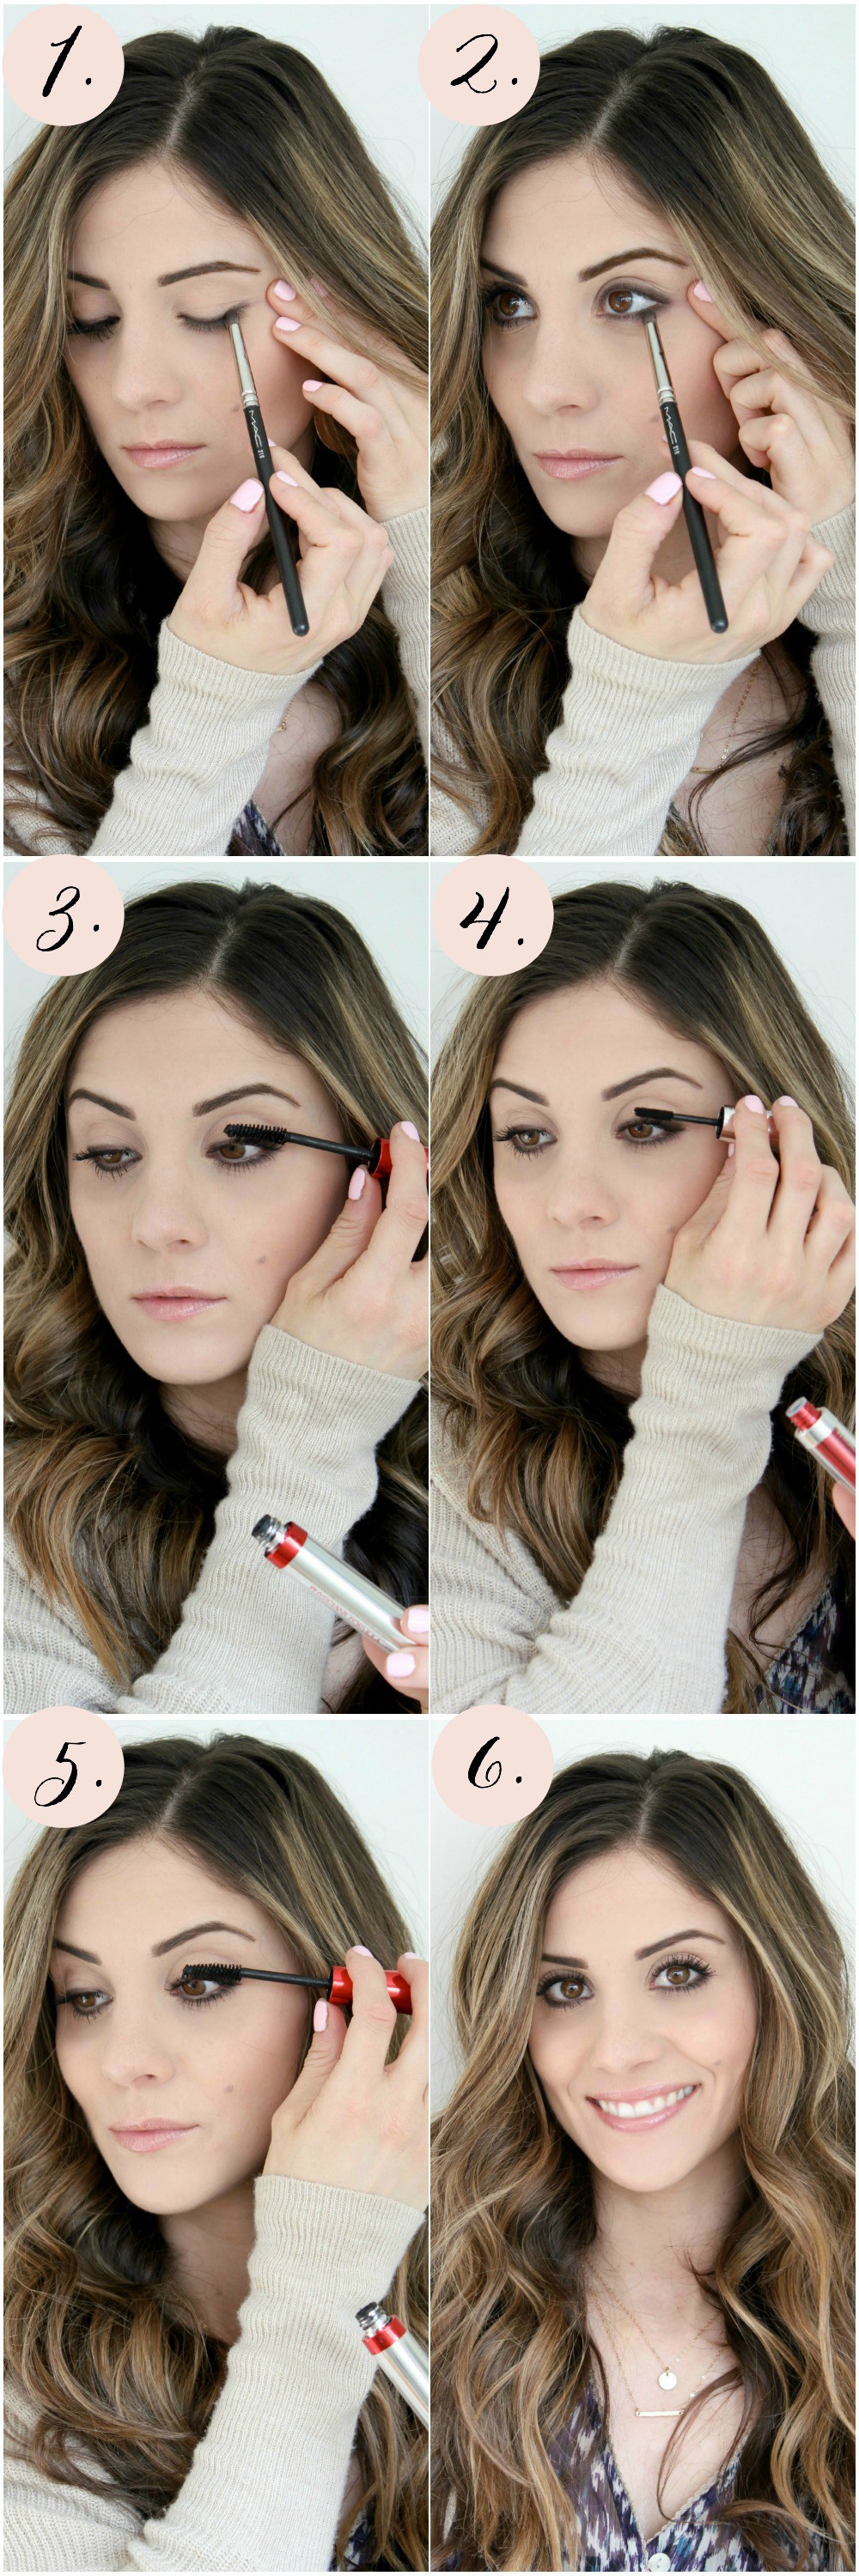 Amazing Makeup Tutorials To Take Your Beauty To The Next Level